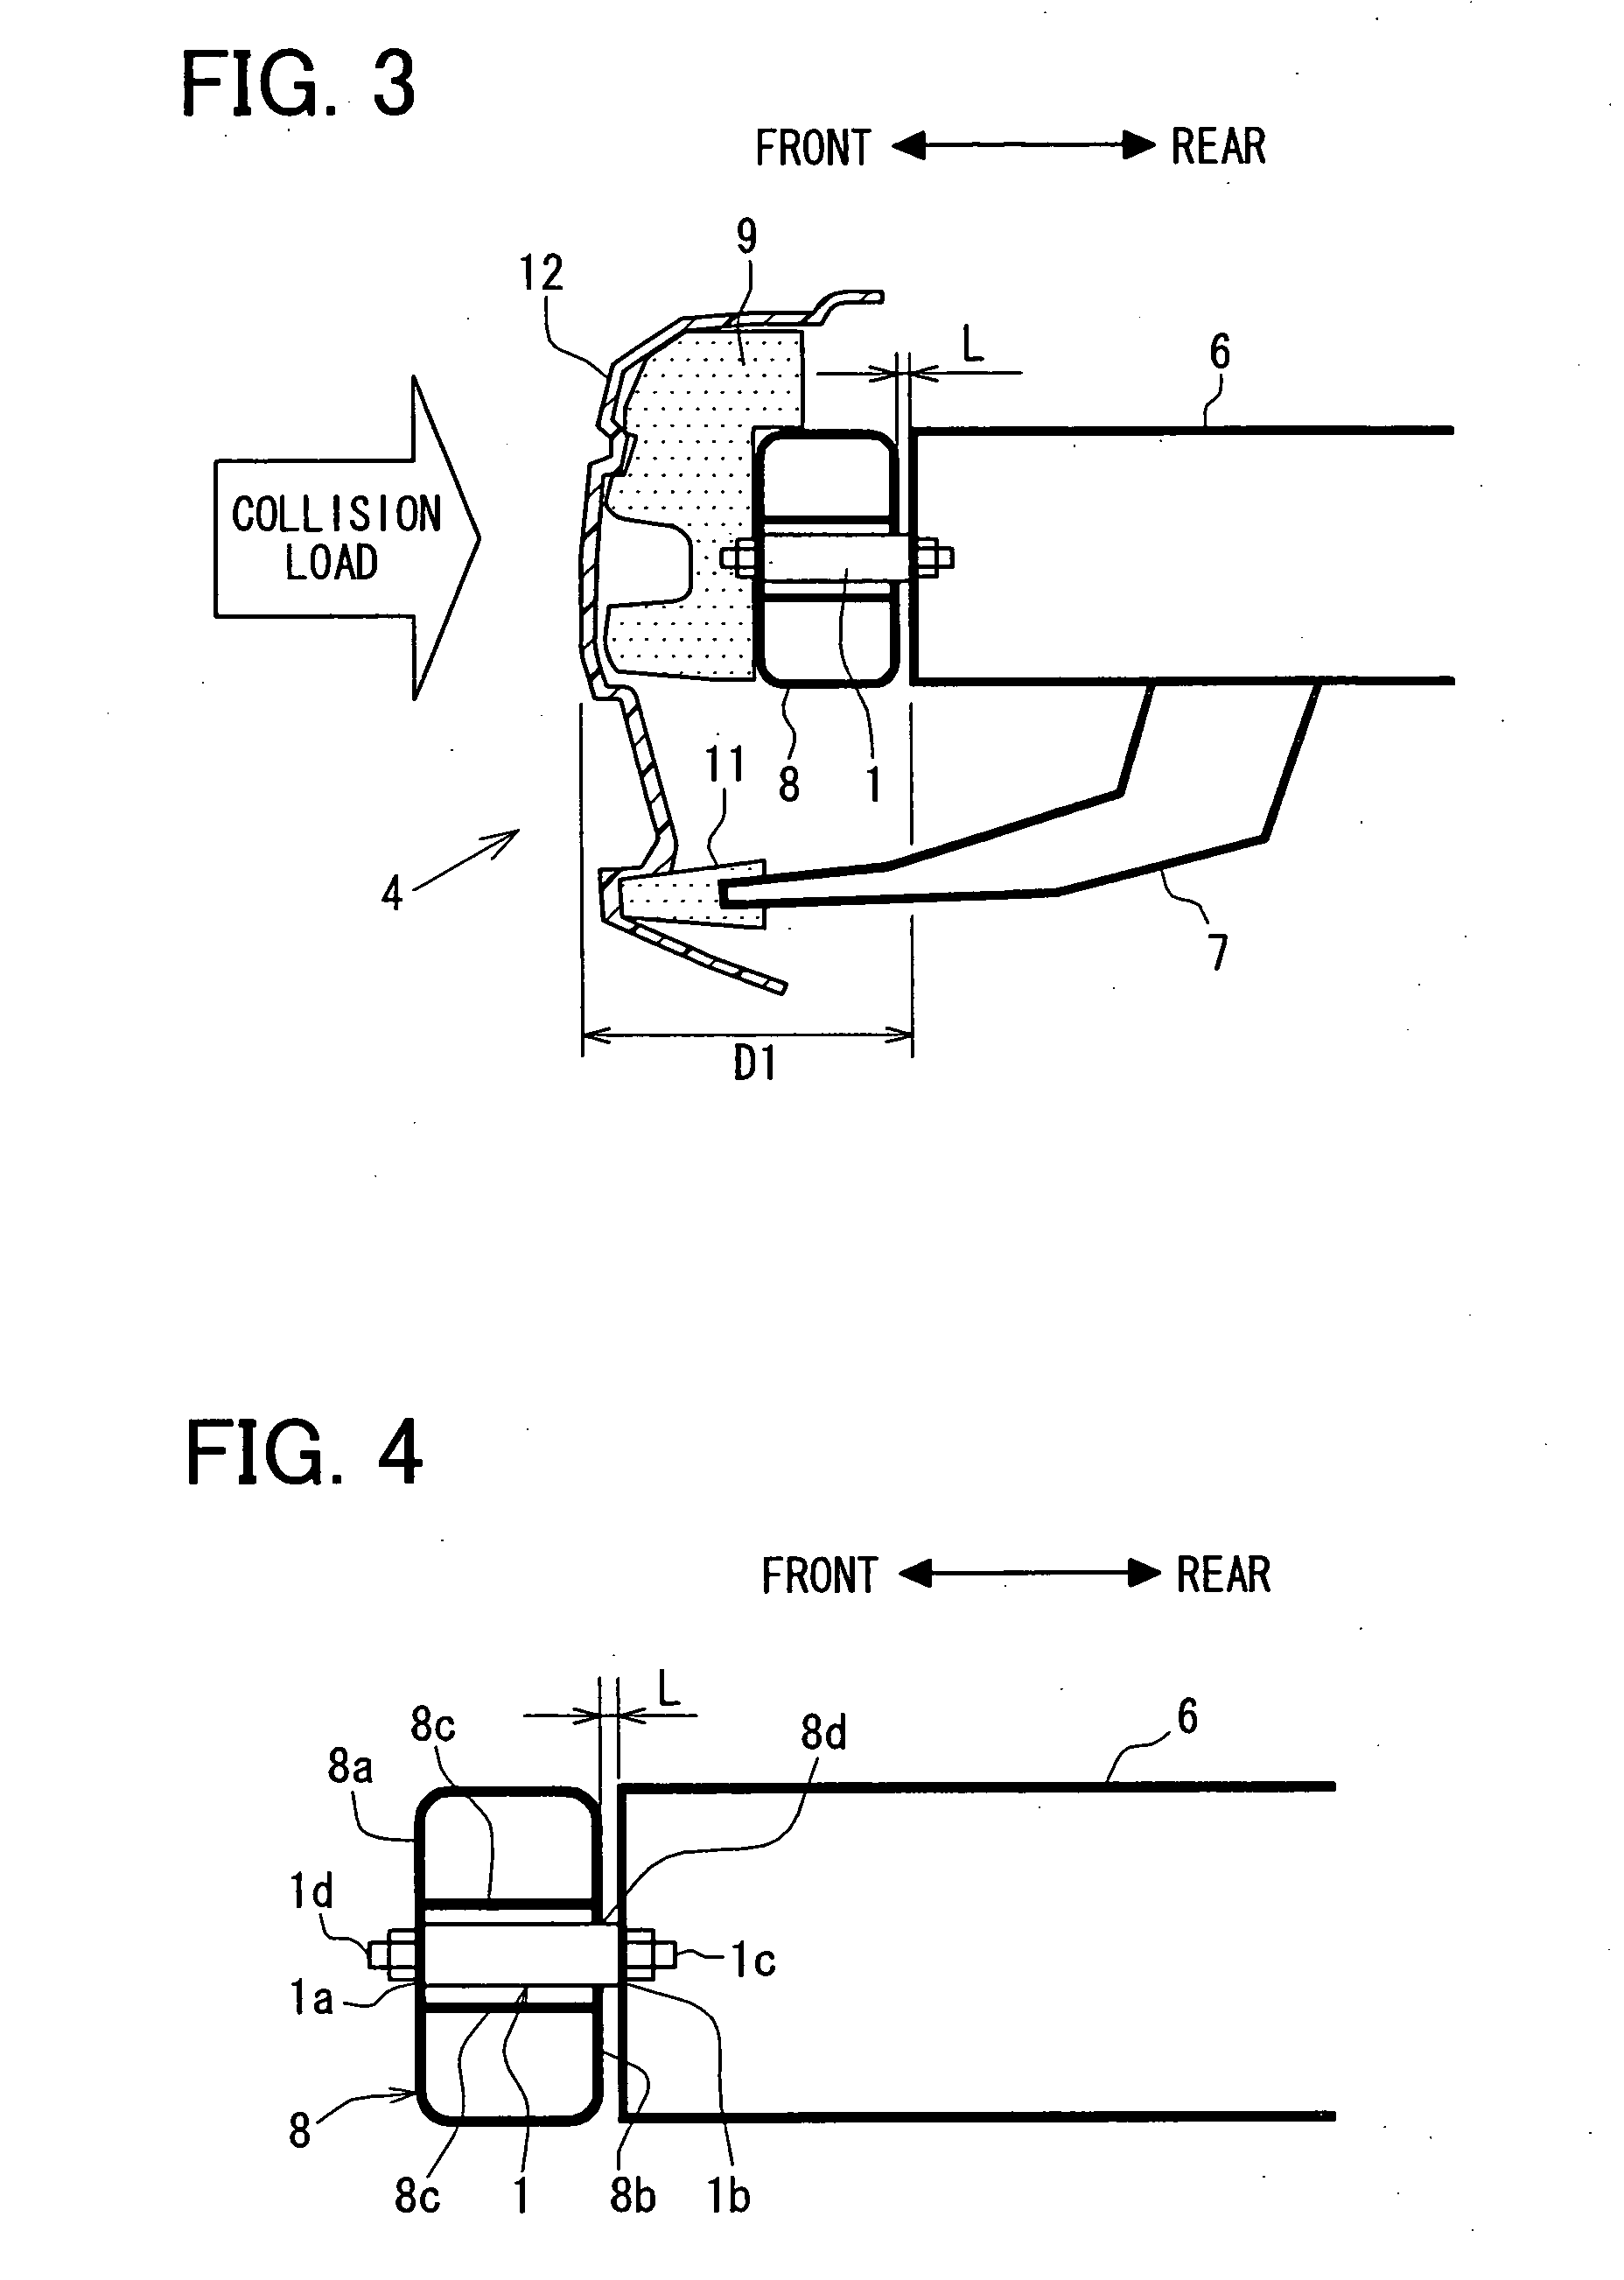 Collision object discrimination apparatus for vehicle